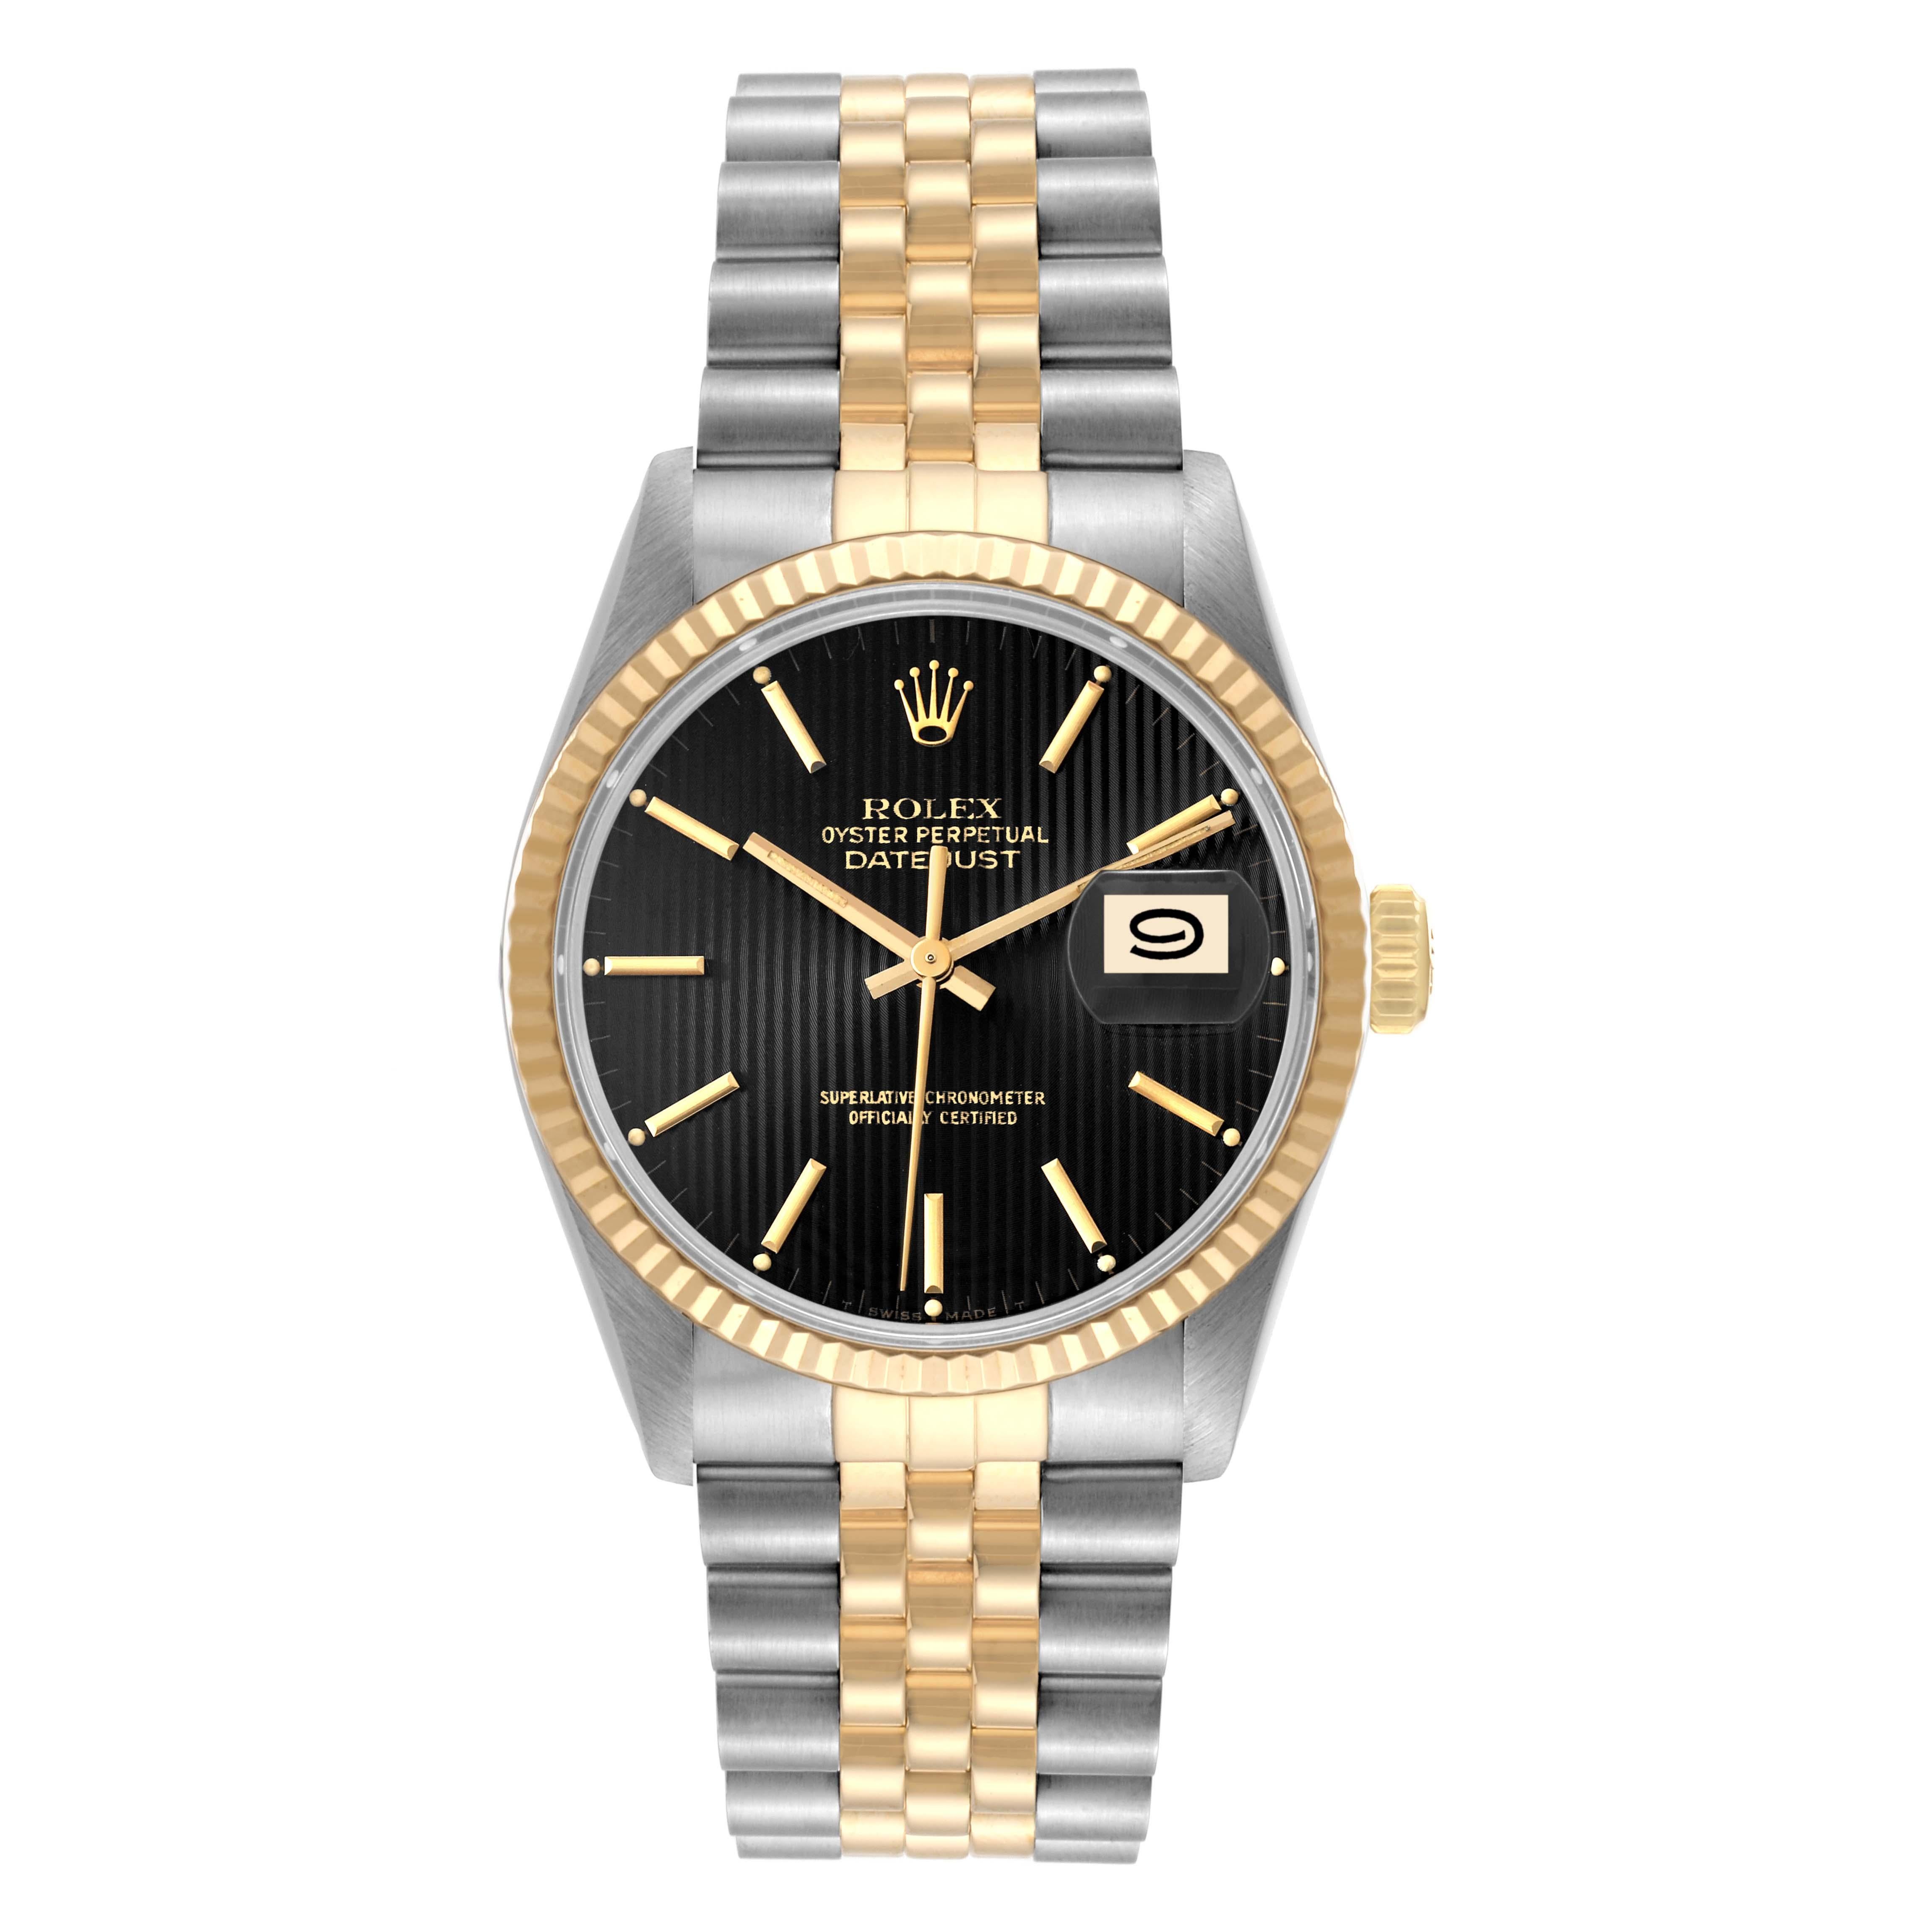 Rolex Datejust Black Tapestry Dial Steel Yellow Gold Vintage Mens Watch 16013. Officially certified chronometer automatic self-winding movement. Stainless steel and 18K yellow gold oyster case 36.0 mm in diameter. Rolex logo on an 18k yellow gold